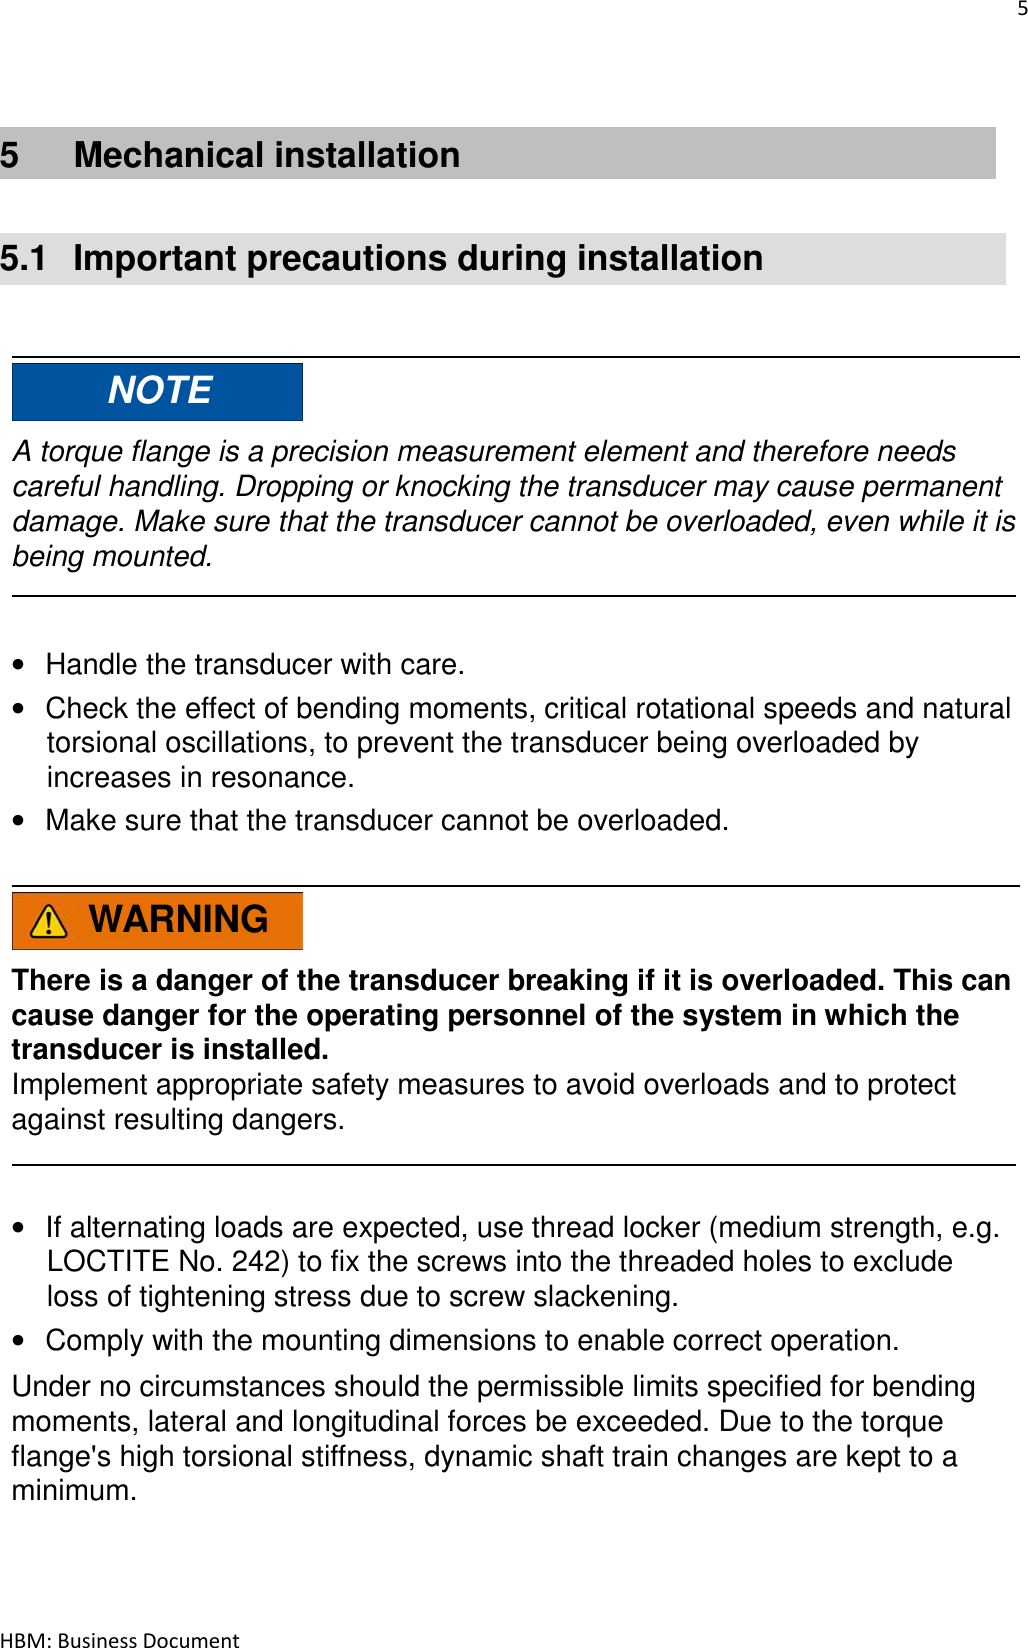 5  HBM: Business Document   5  Mechanical installation   5.1  Important precautions during installation     NOTE  A torque flange is a precision measurement element and therefore needs careful handling. Dropping or knocking the transducer may cause permanent damage. Make sure that the transducer cannot be overloaded, even while it is being mounted.    • Handle the transducer with care. • Check the effect of bending moments, critical rotational speeds and natural torsional oscillations, to prevent the transducer being overloaded by increases in resonance. • Make sure that the transducer cannot be overloaded.    WARNING  There is a danger of the transducer breaking if it is overloaded. This can cause danger for the operating personnel of the system in which the transducer is installed. Implement appropriate safety measures to avoid overloads and to protect against resulting dangers.    • If alternating loads are expected, use thread locker (medium strength, e.g. LOCTITE No. 242) to fix the screws into the threaded holes to exclude loss of tightening stress due to screw slackening. • Comply with the mounting dimensions to enable correct operation.  Under no circumstances should the permissible limits specified for bending moments, lateral and longitudinal forces be exceeded. Due to the torque flange&apos;s high torsional stiffness, dynamic shaft train changes are kept to a minimum. 